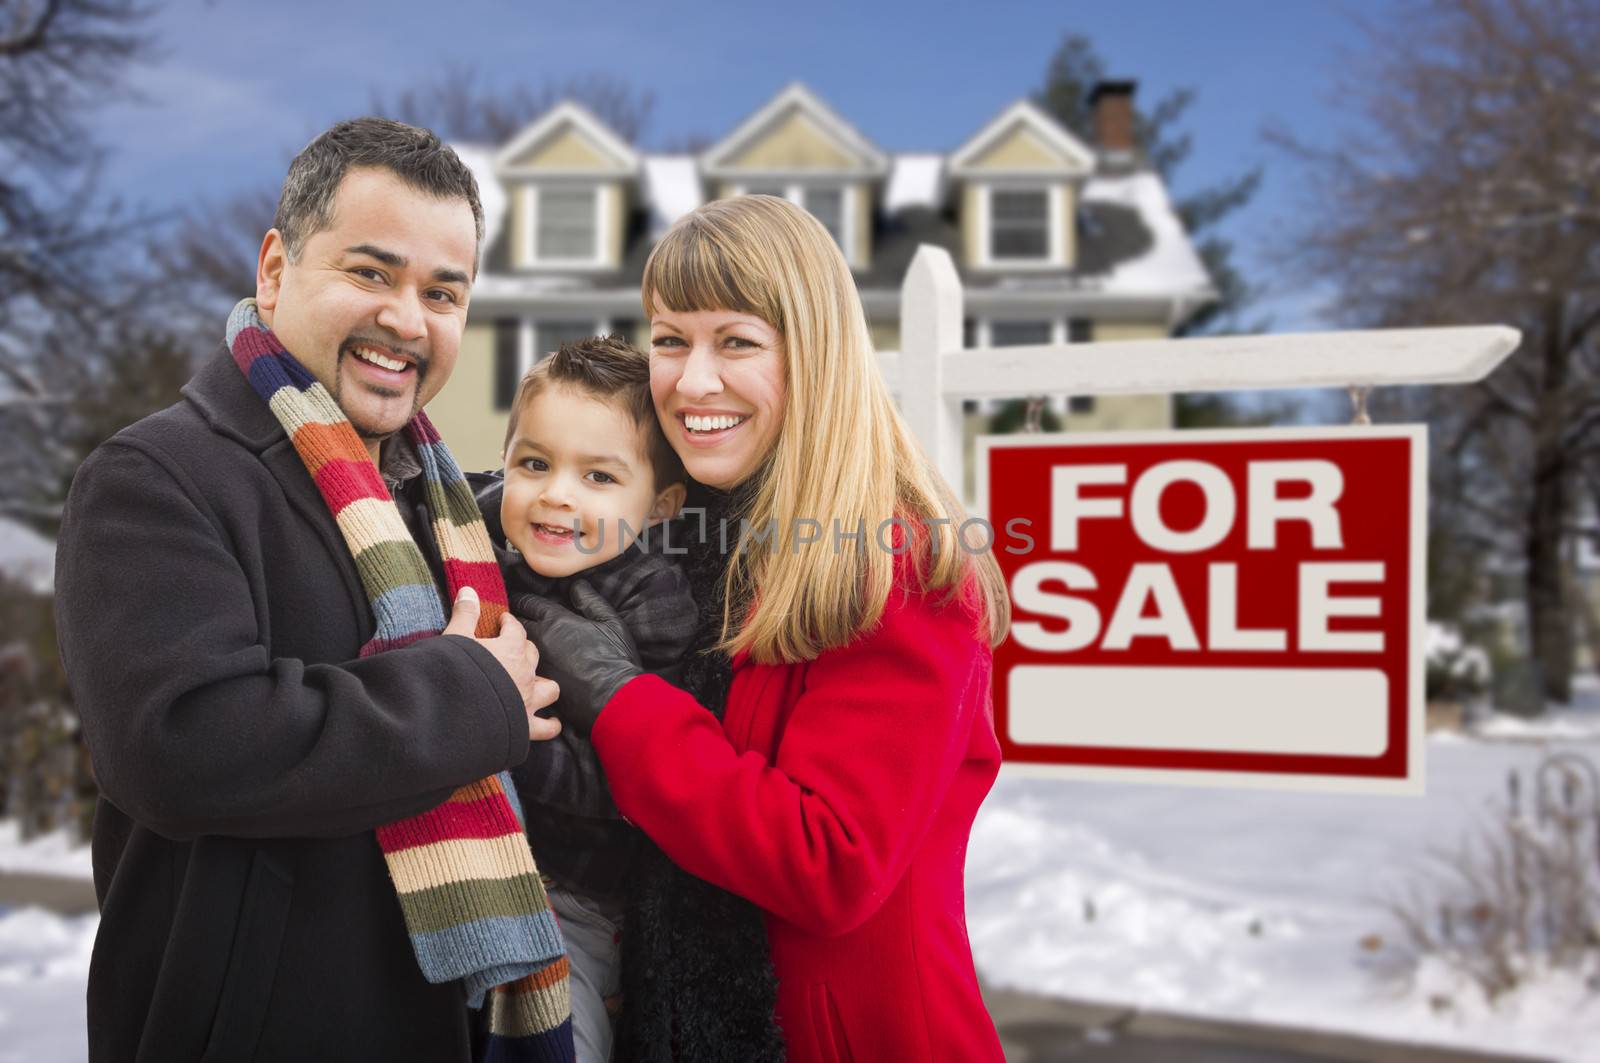 Warmly Dressed Young Mixed Race Family in Front of Home For Sale Real Estate Sign and House with Snow On The Ground.